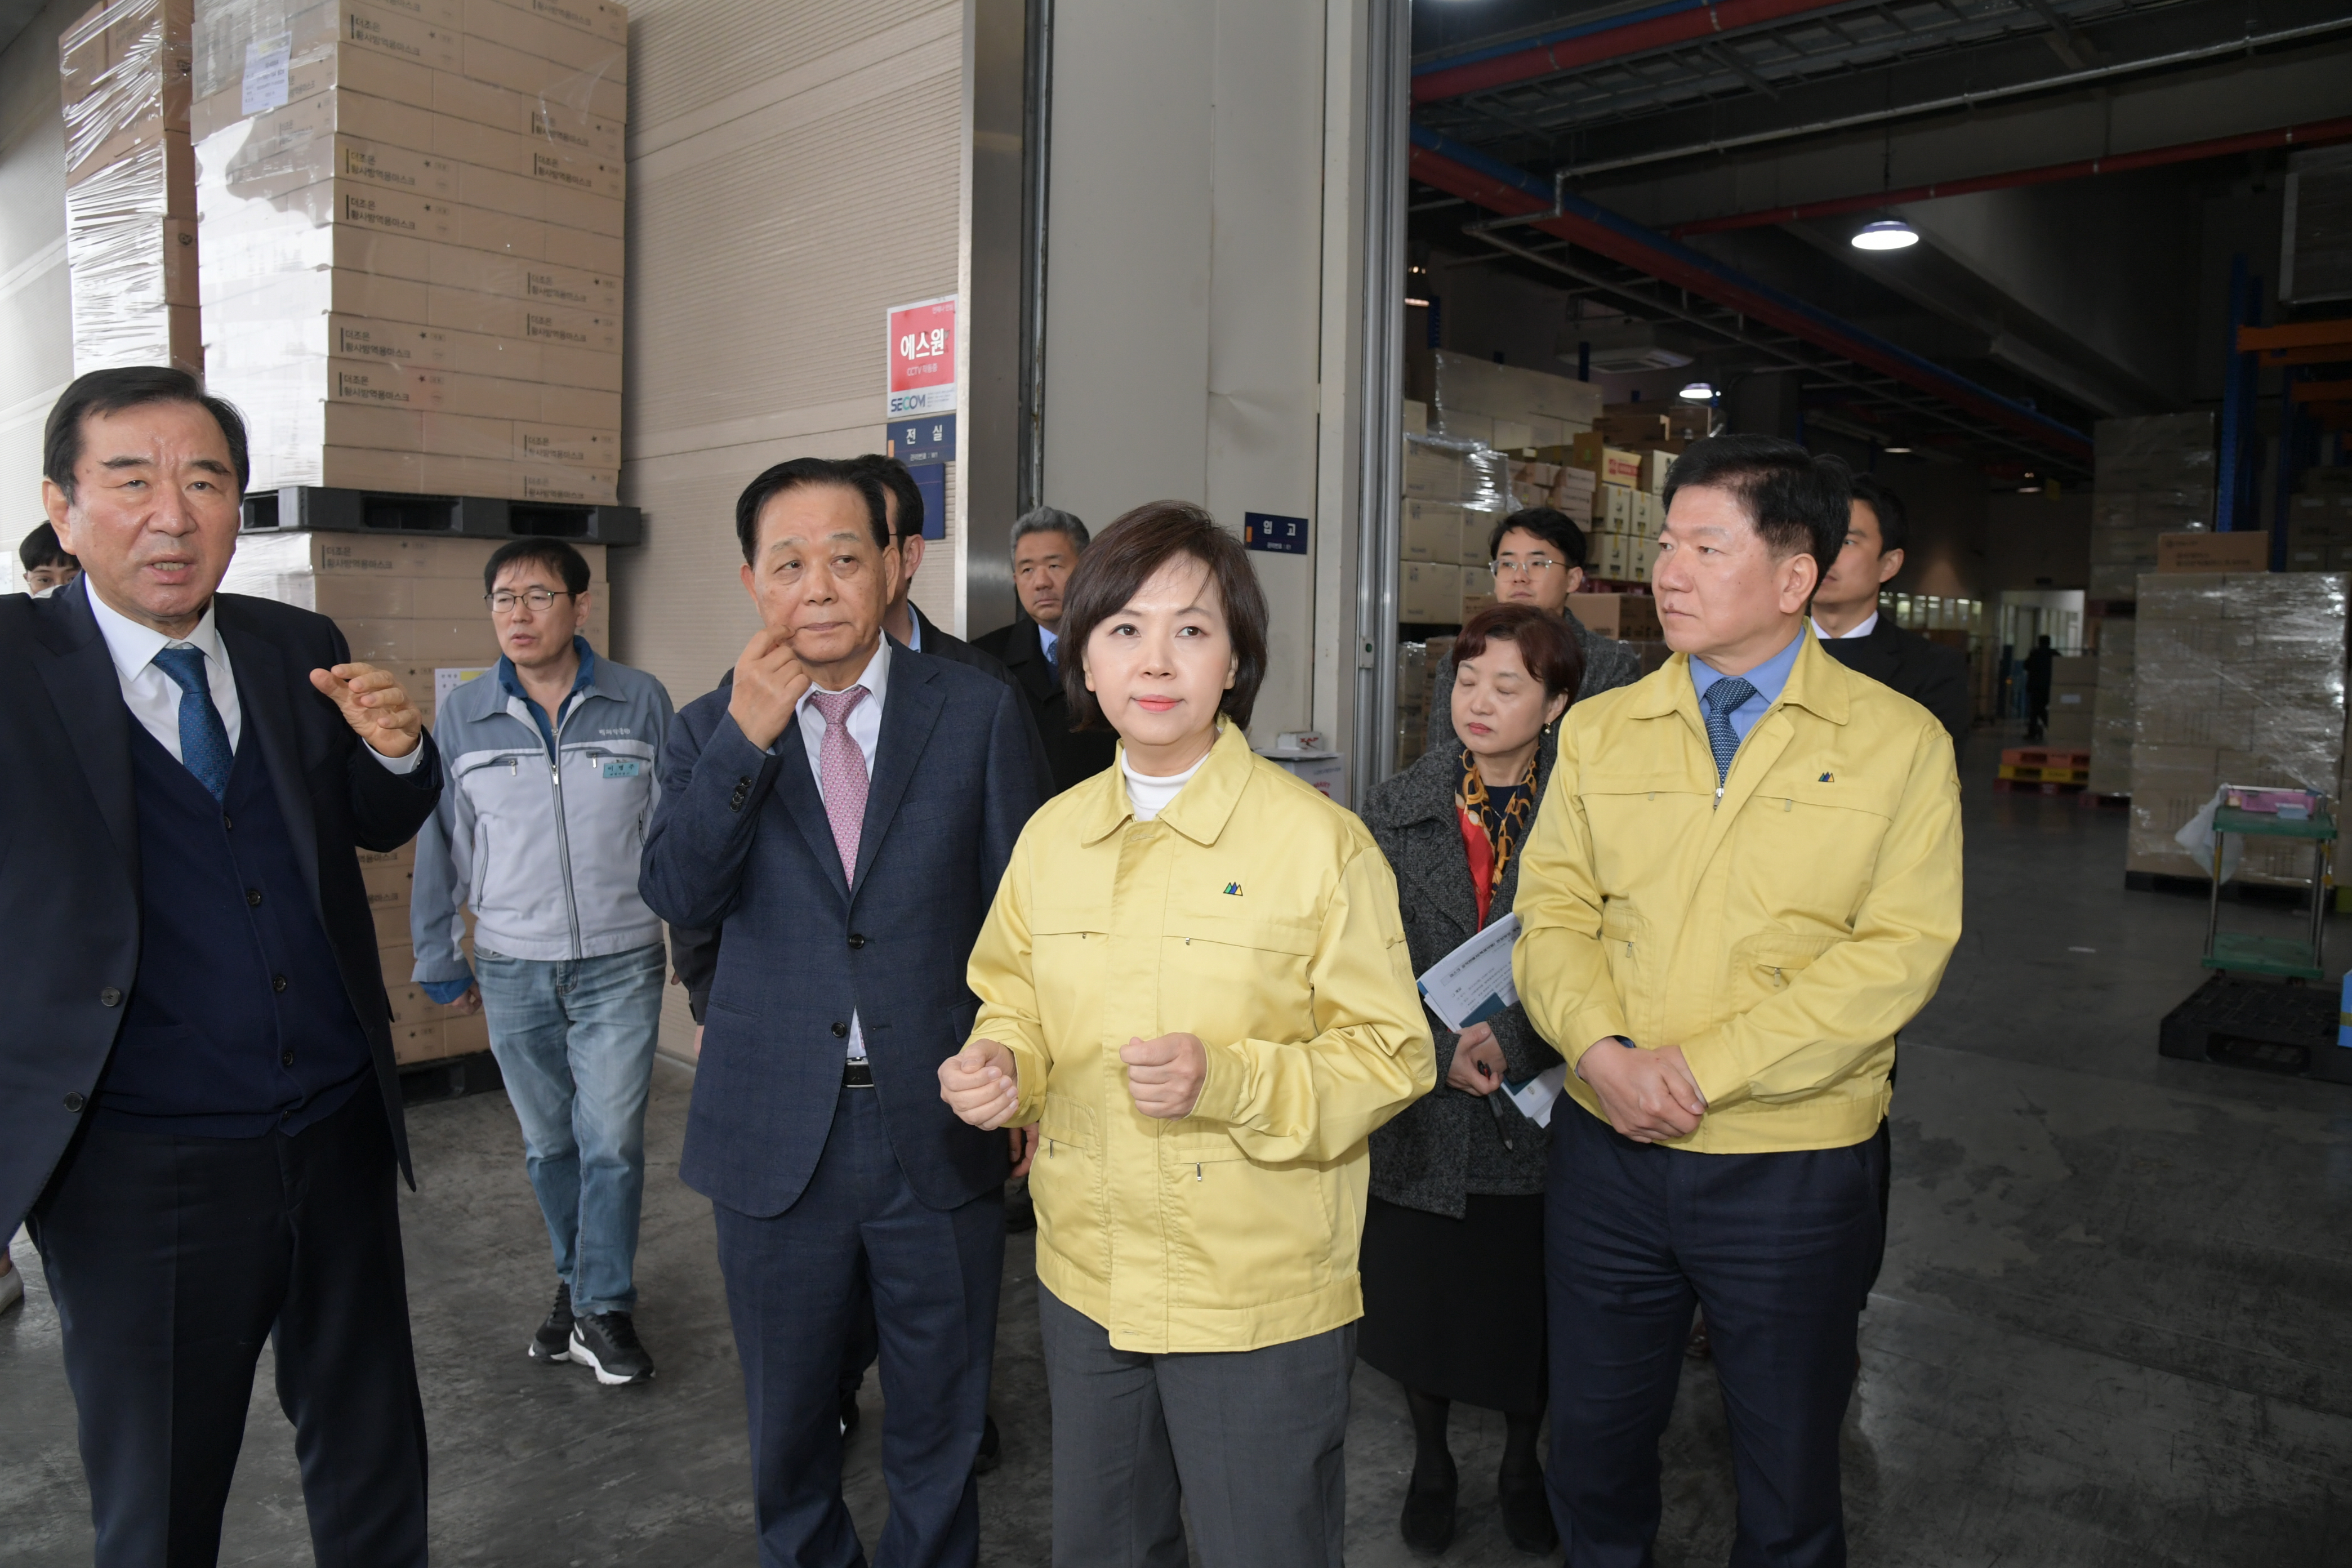 Photo News2 - [Mar. 10, 2020] Minister conducts inspection of public mask distribution center